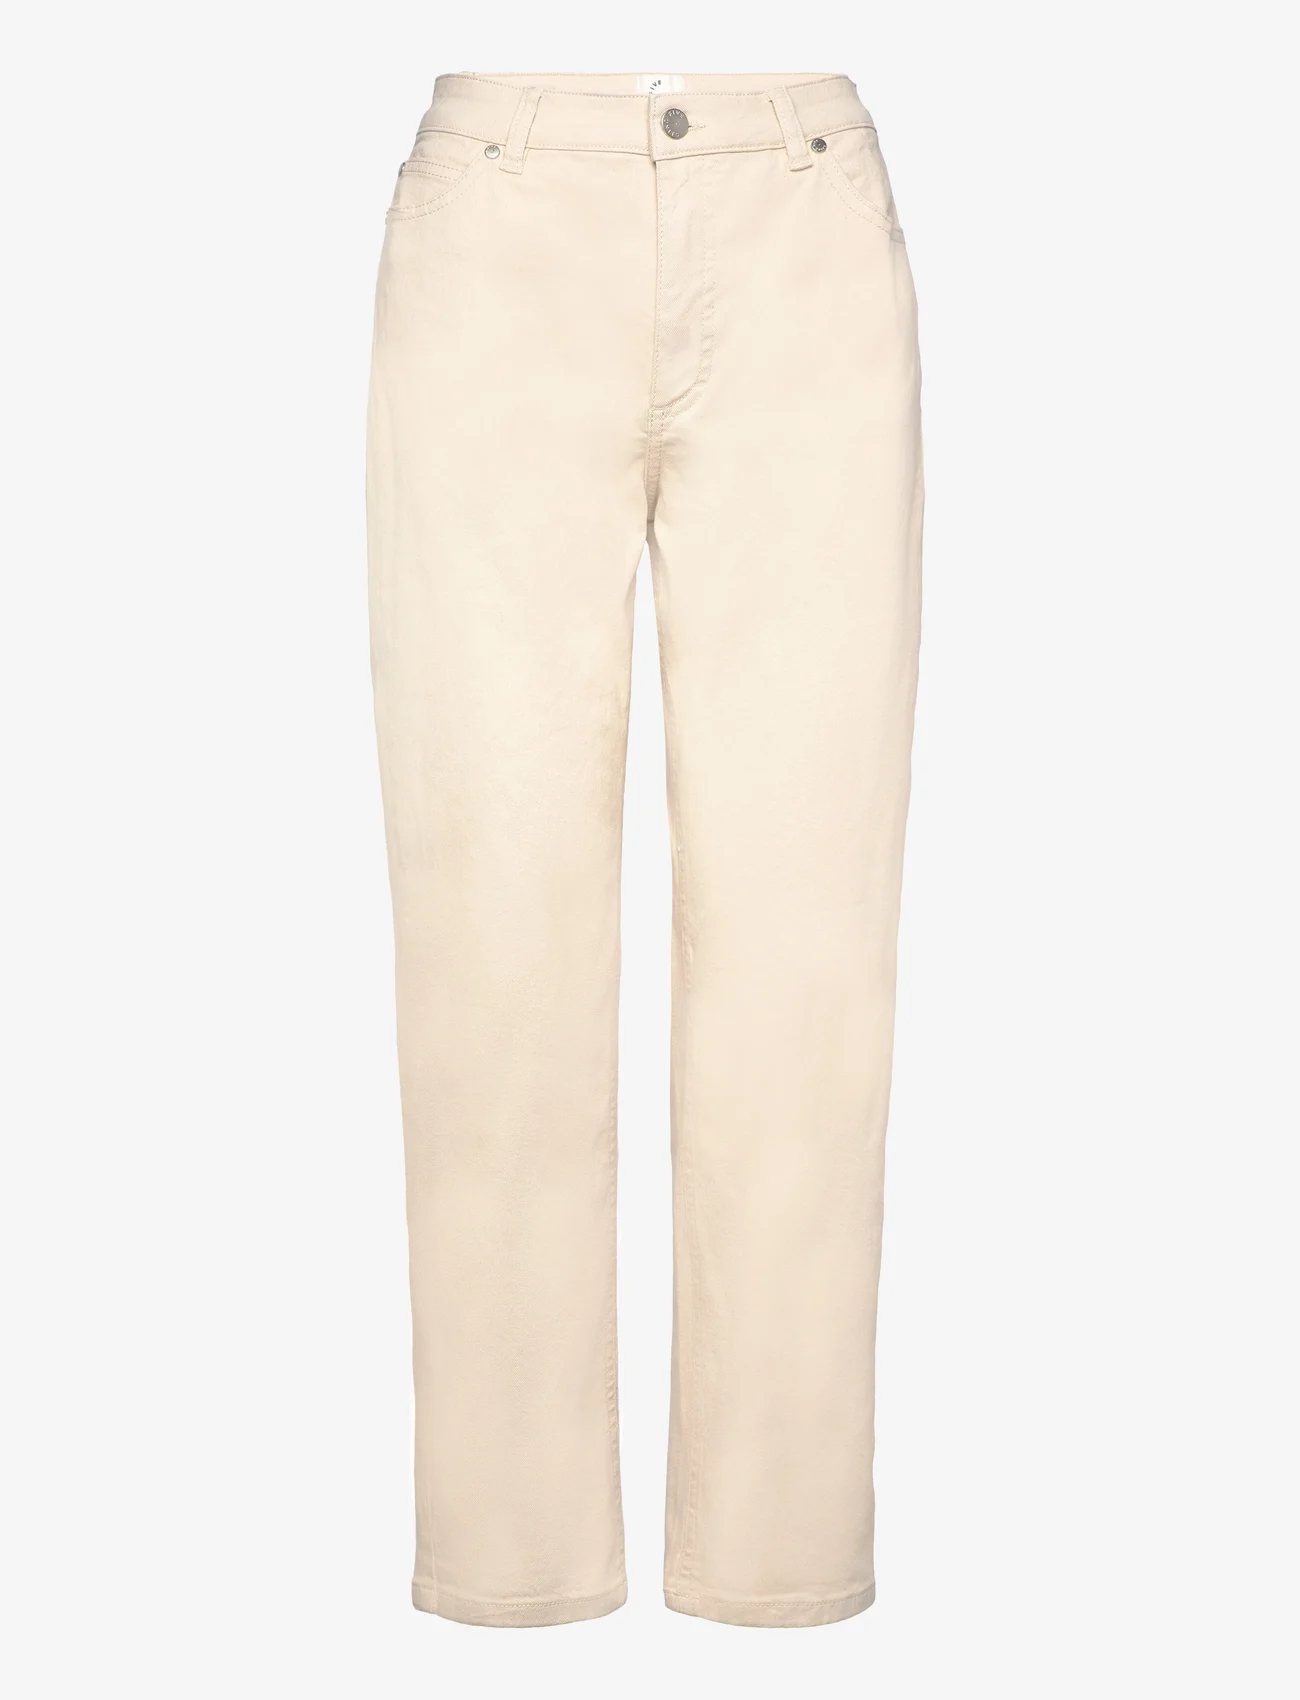 FIVEUNITS - MollyFV Ankle - straight jeans - natural - 0